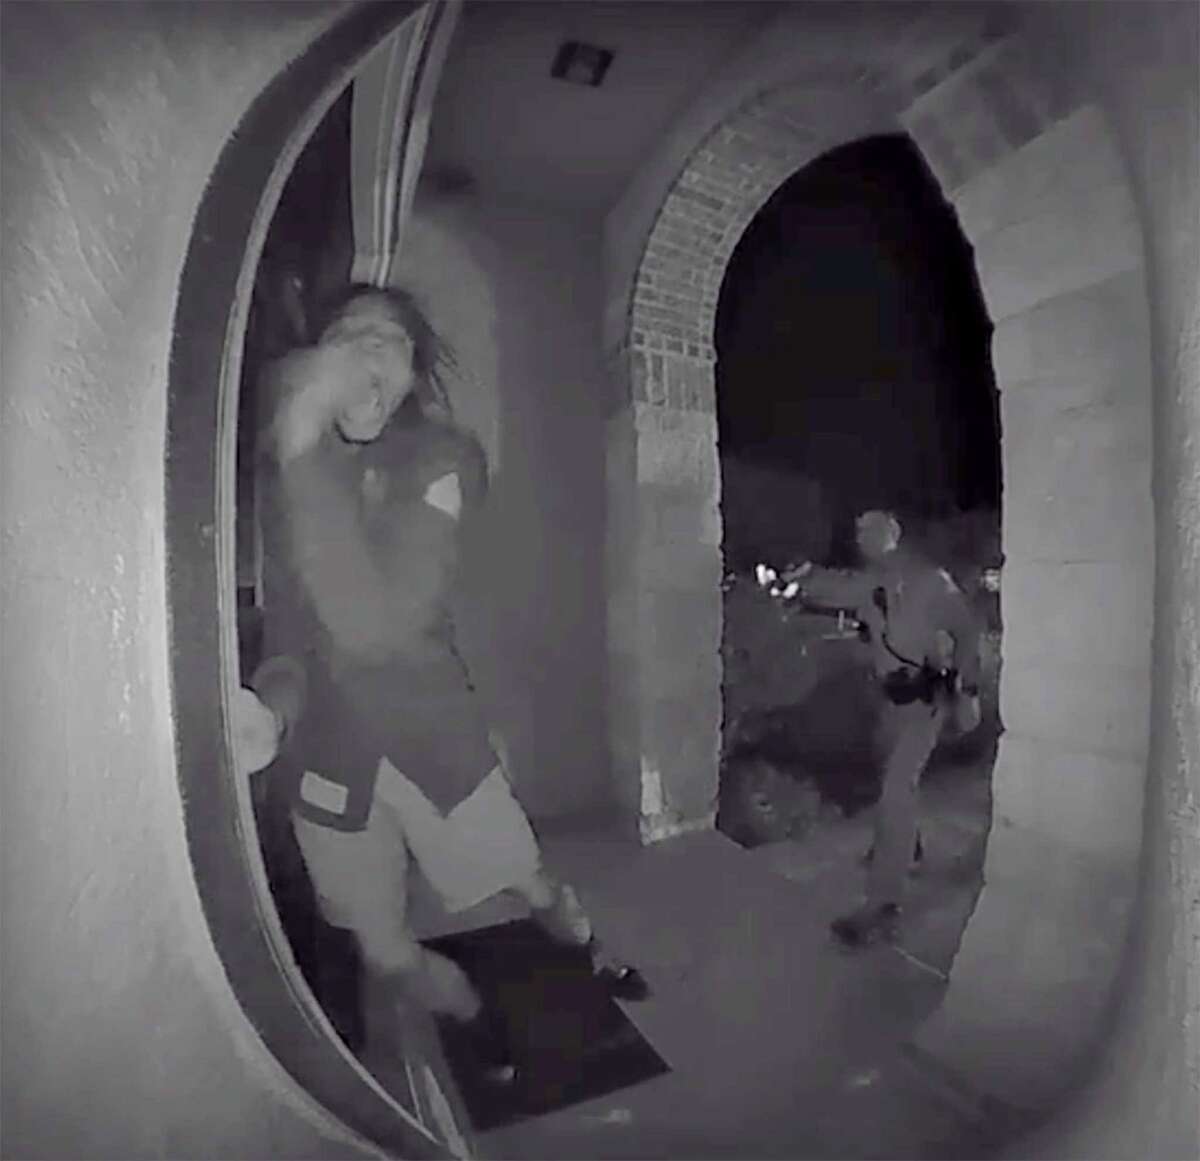 Screen grabs from a home surveillance video show Schertz Police tasing Zekee Rayford, 18, as he pounds on his front door his home calling for his parents.